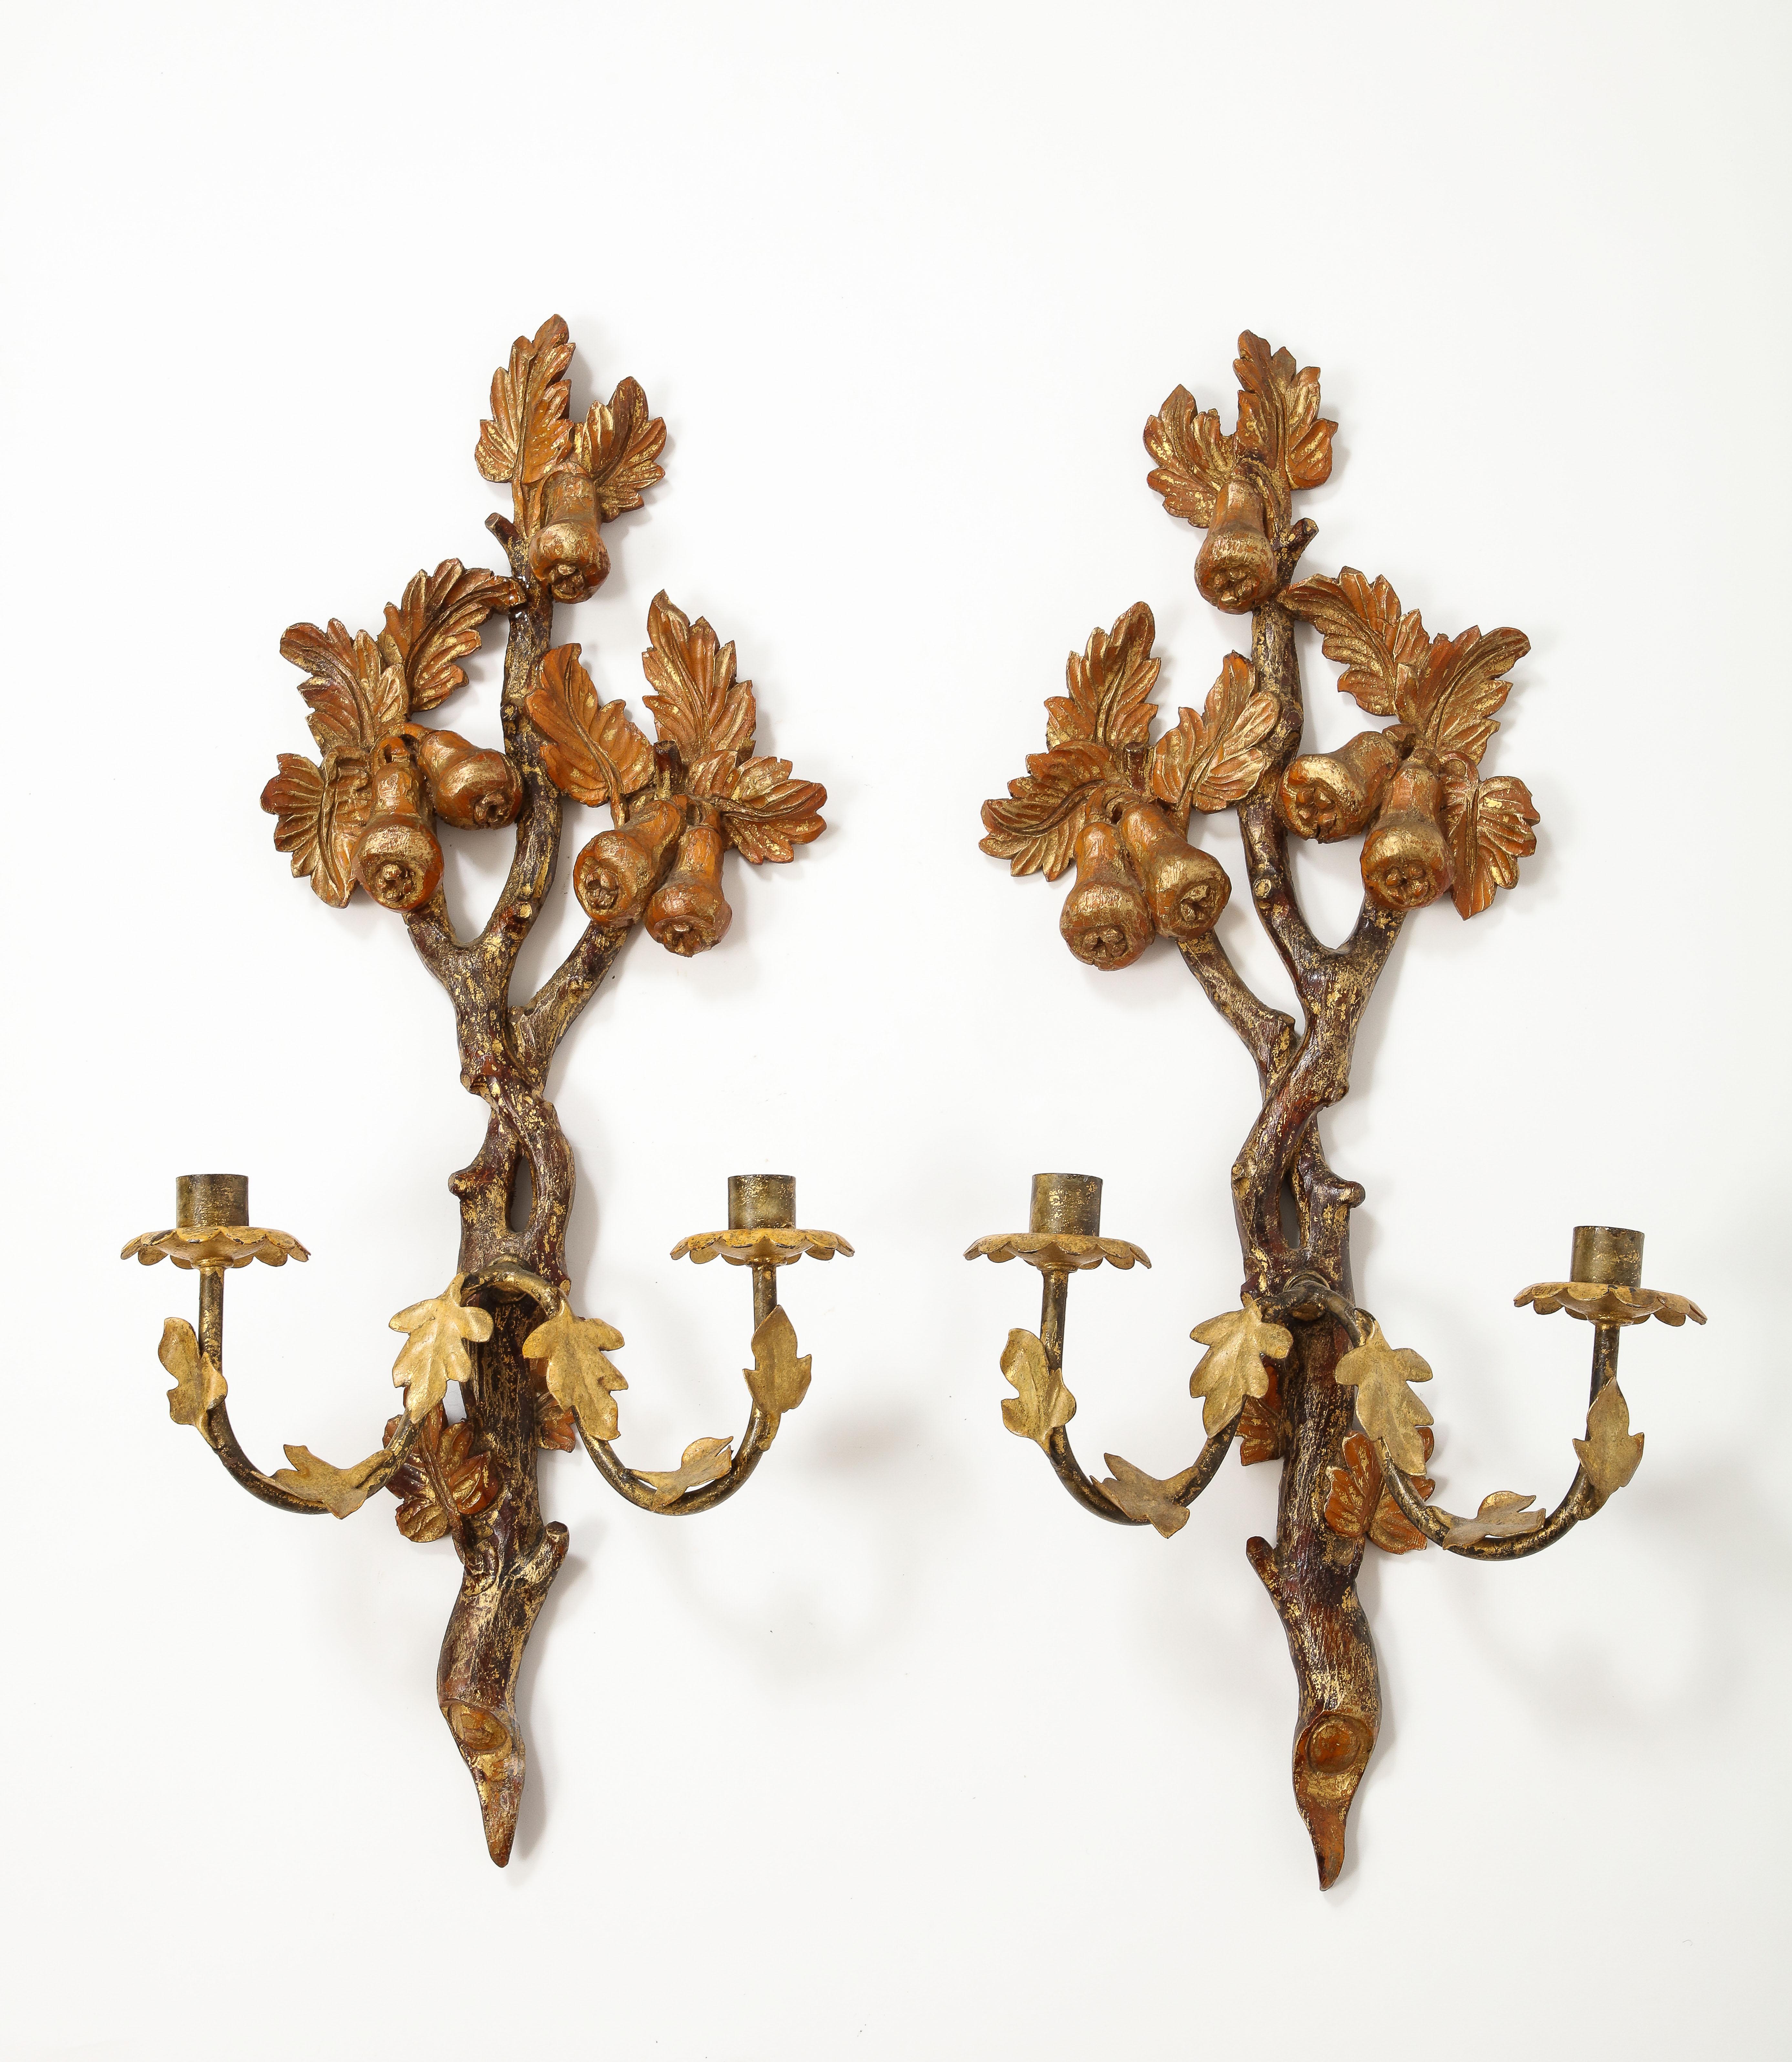 Pair of 19th Century continental hand painted and hand carved wood candle sconces featuring leaves and pears. Beautiful ormolu and gilt condition, in the Empire or Neoclassical style. Each sconce holds two candles. 